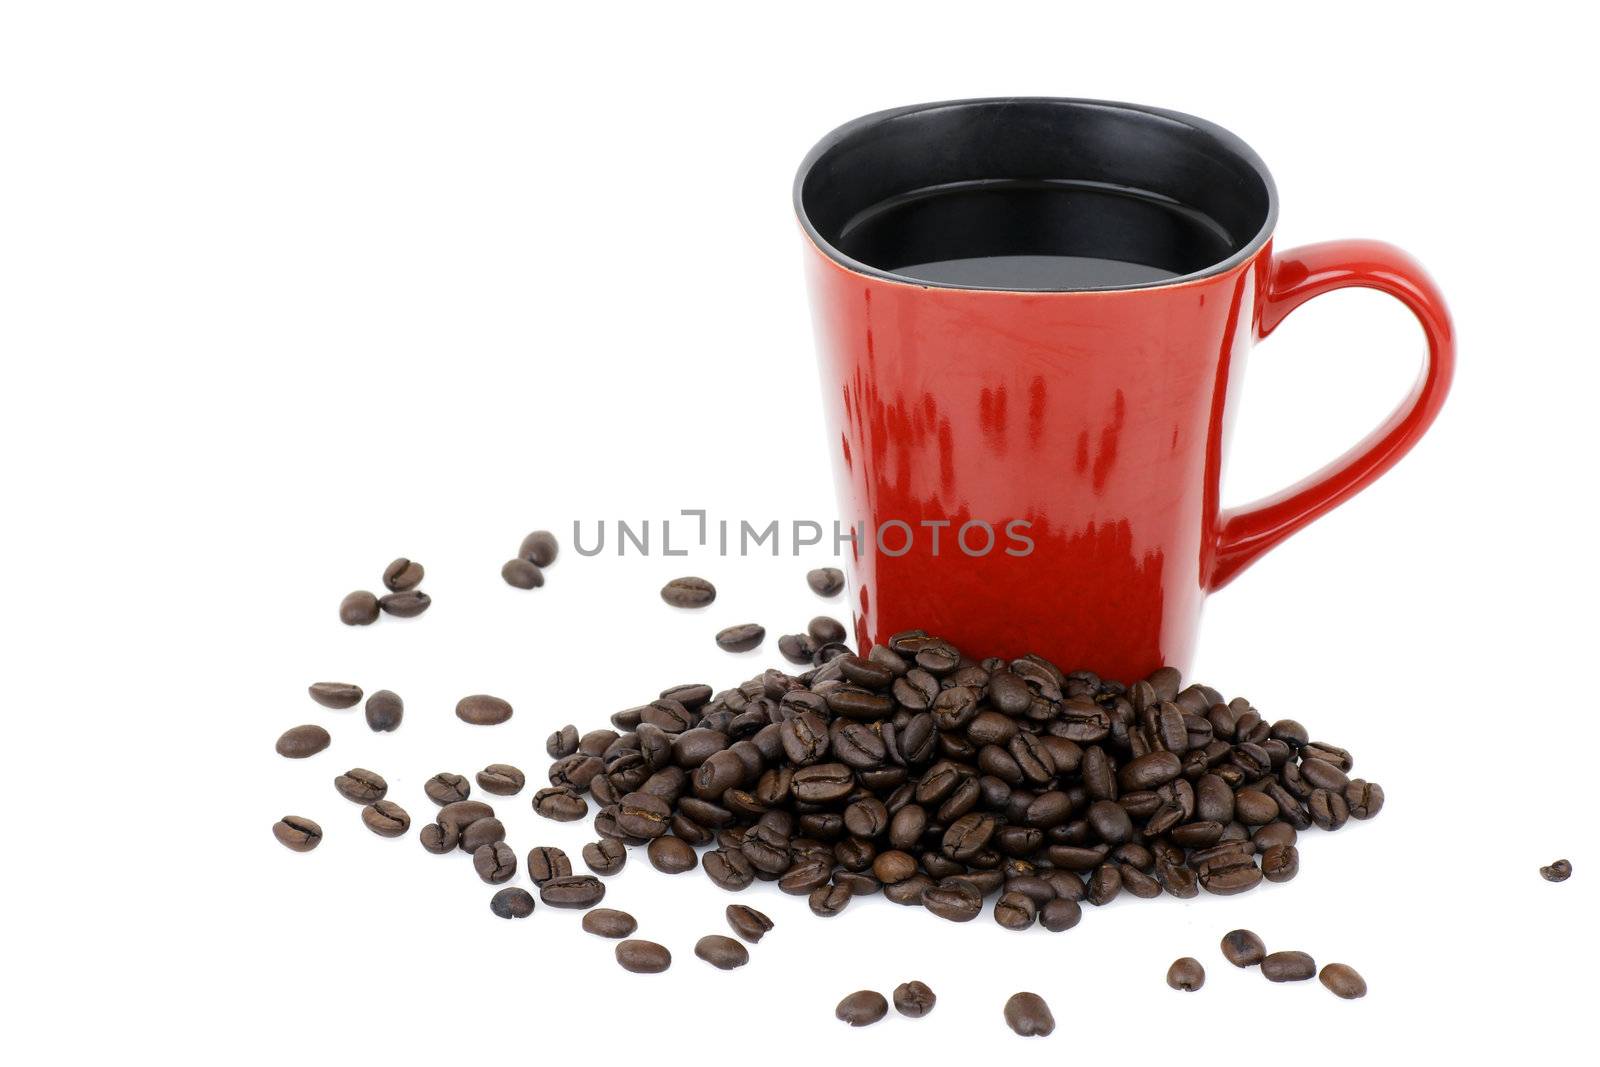 Red mug and coffee beans by Mirage3